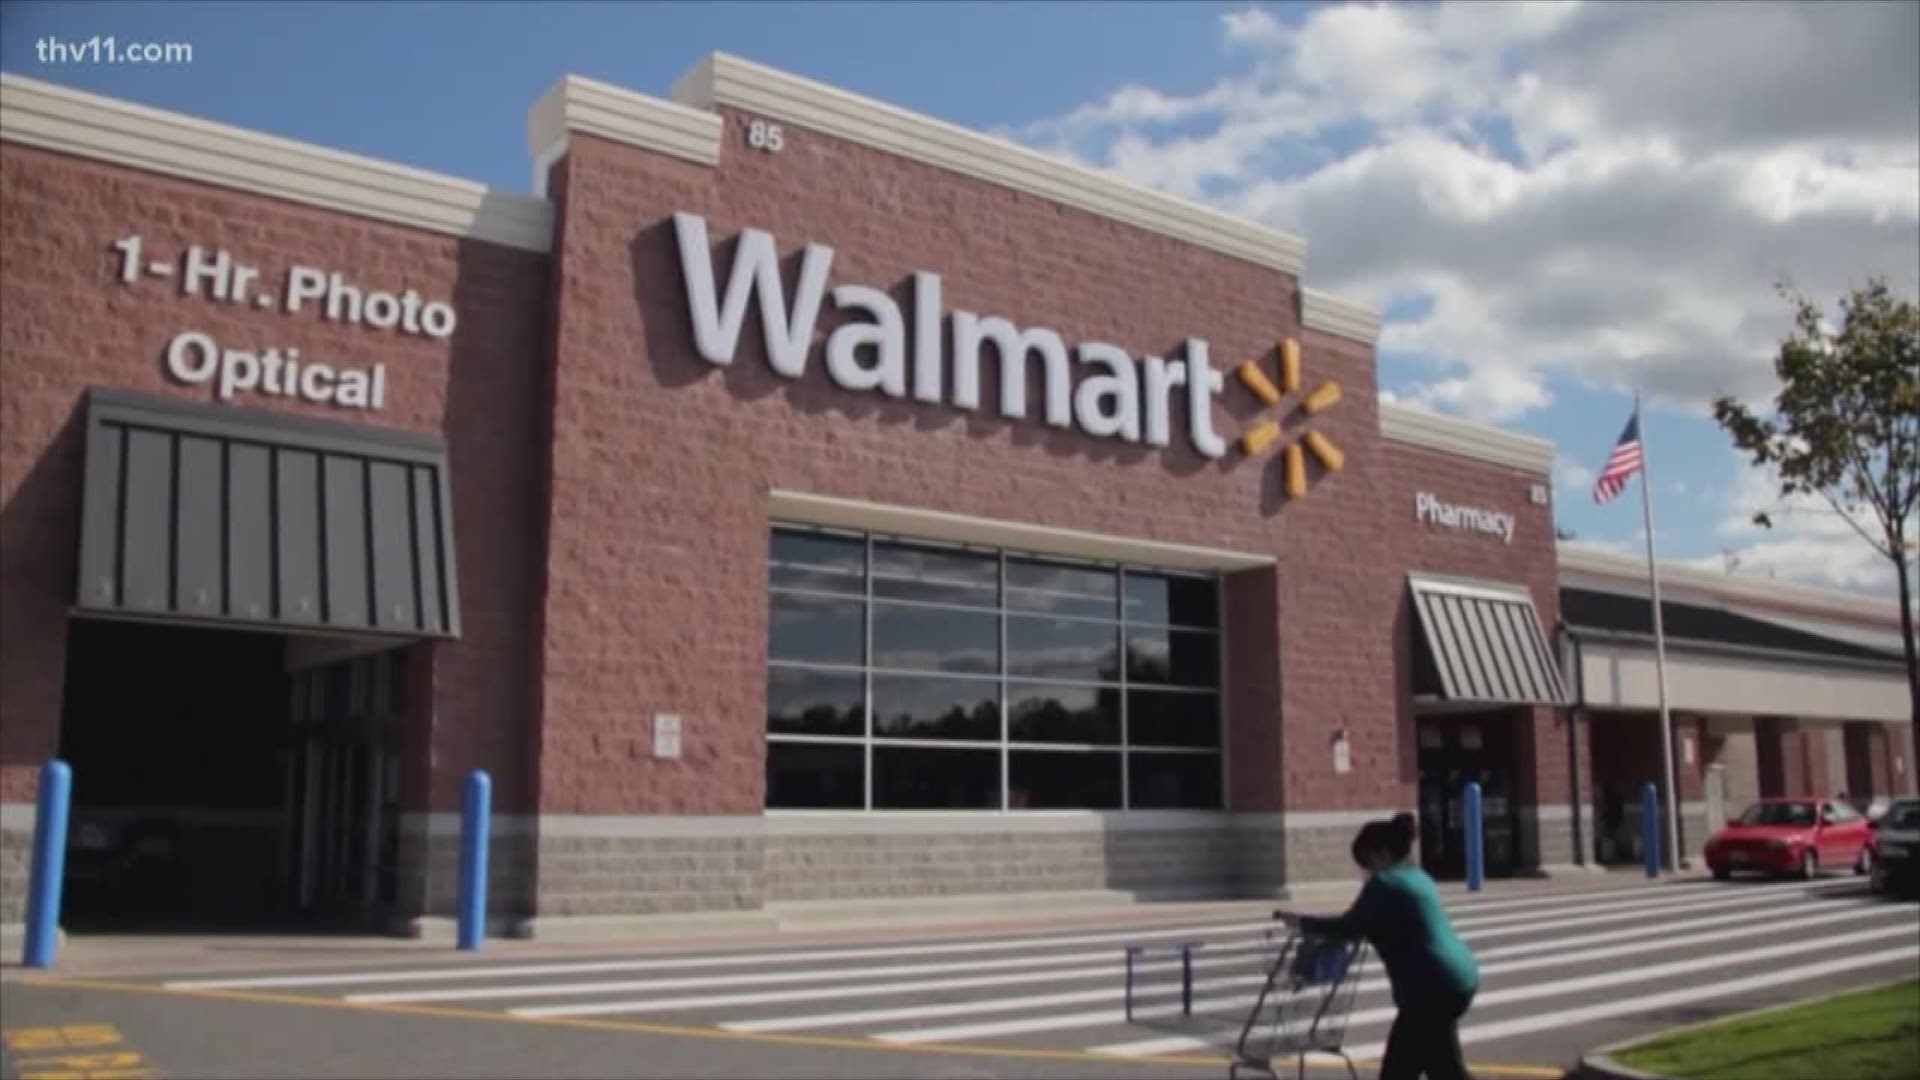 Walmart's recent legal success is getting them closer to selling liquor in stores in Texas.